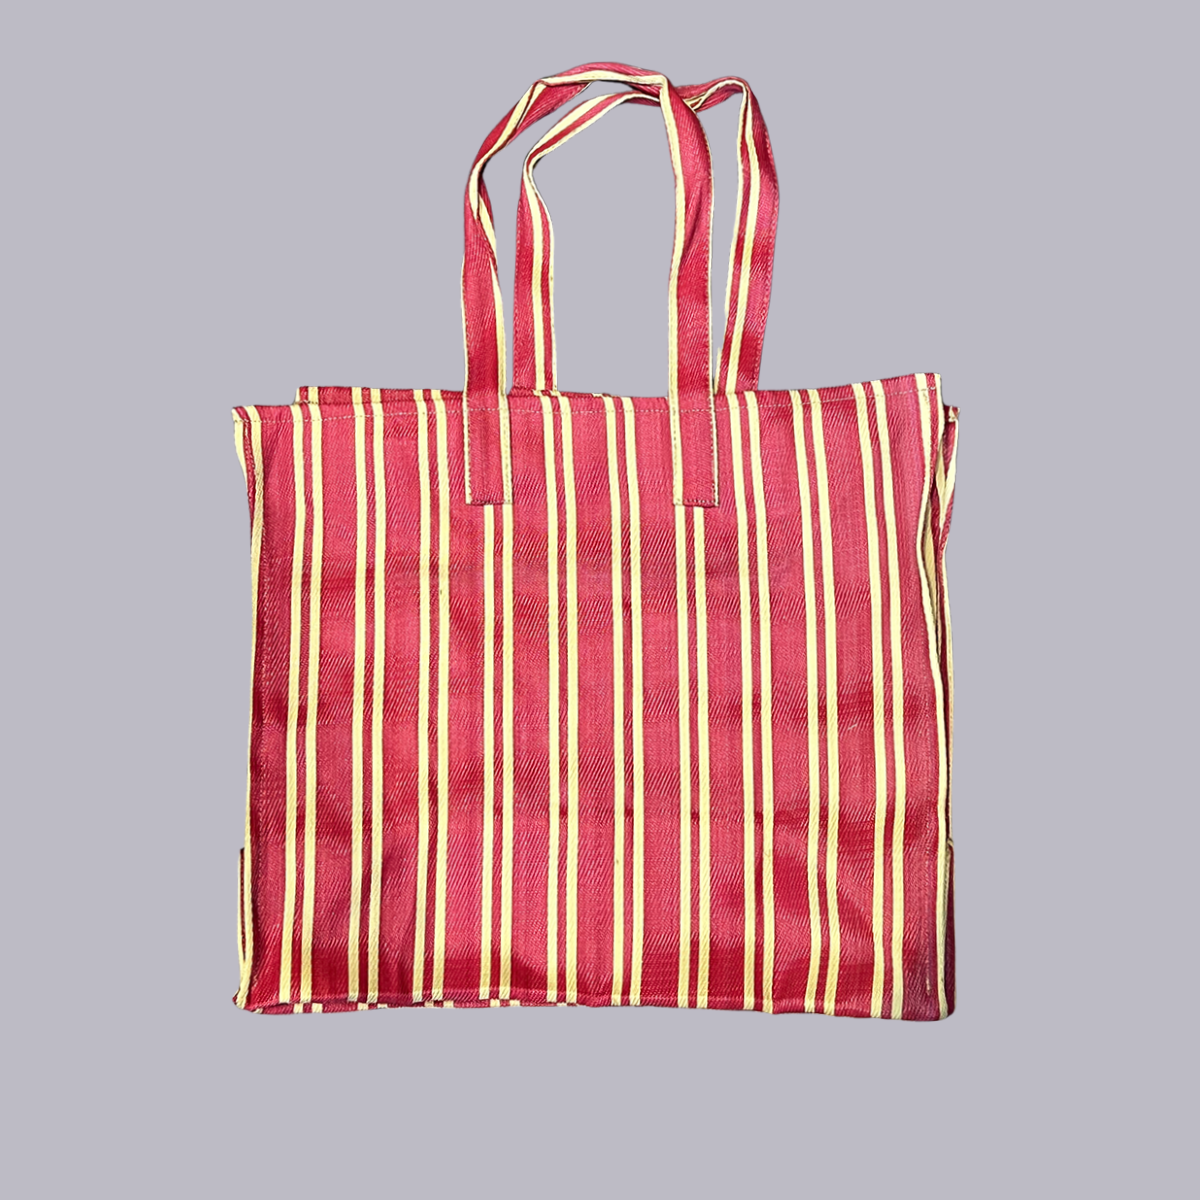 Pan After | Recycled Plastic Tote Bag | Red